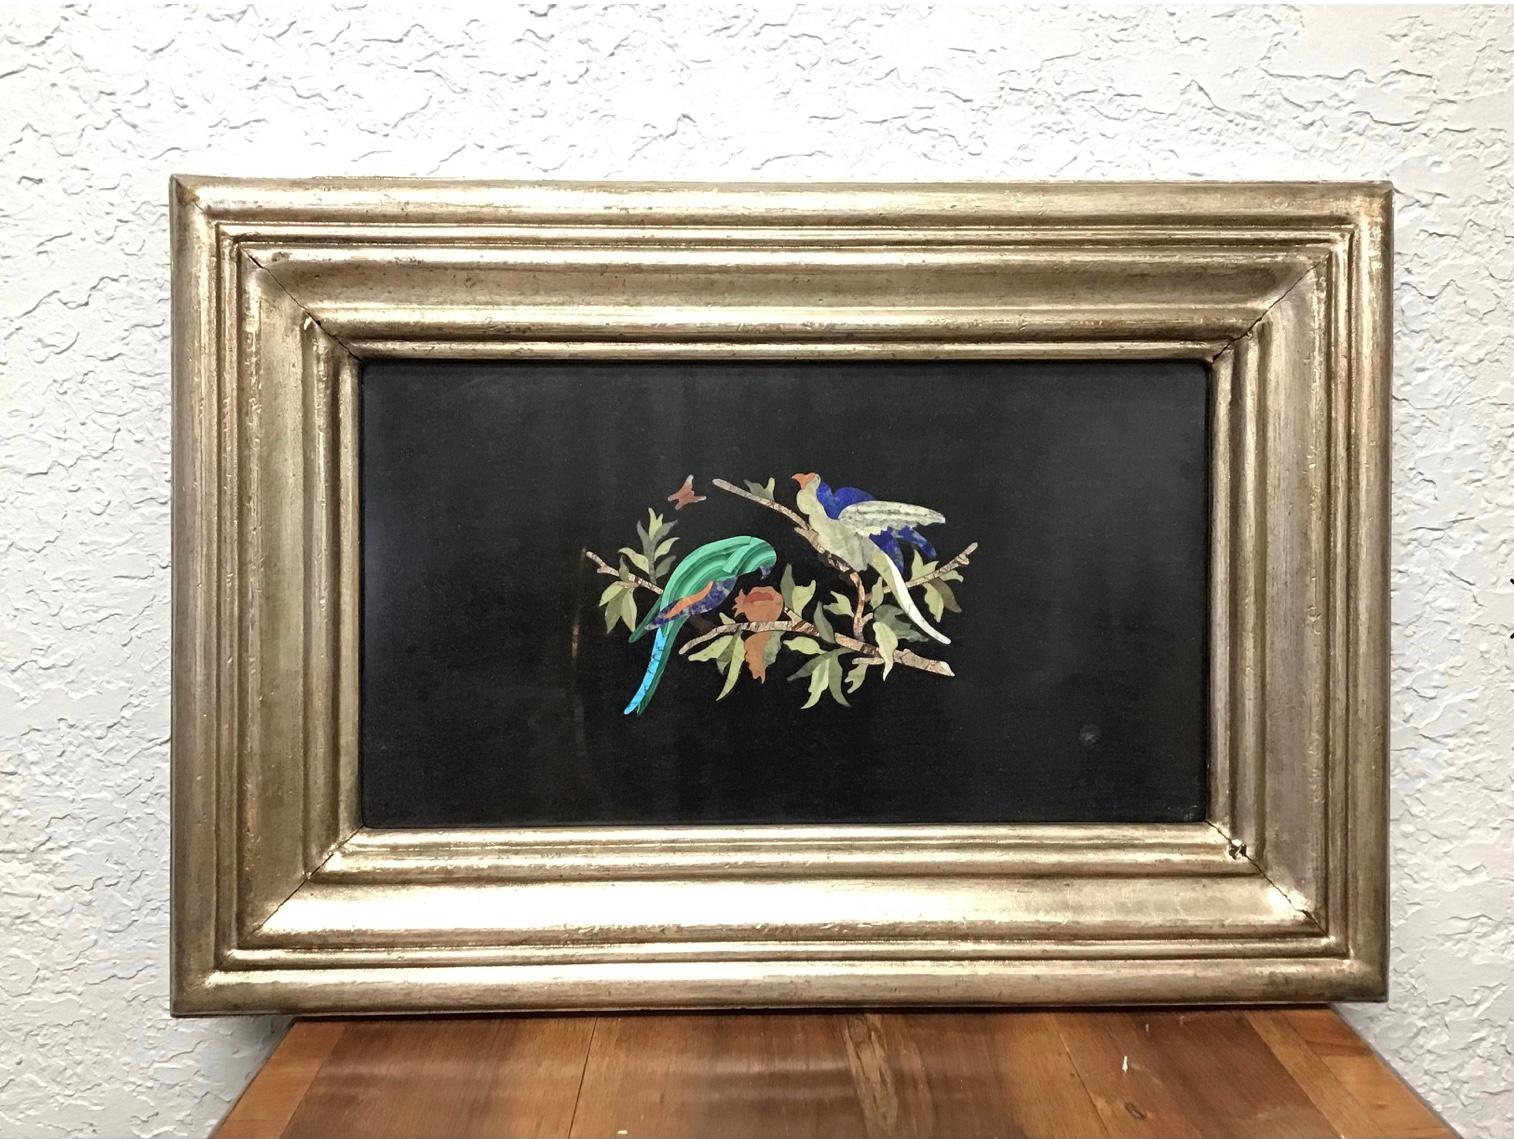 bItalian Pietra Dura bird plaque. Depicts colorful bird made of precious stone inlaid on black marble, standing on a branch having flowers and leaves, also precious stone. Above are butterfly in flight. The silver gilded frame is original to the